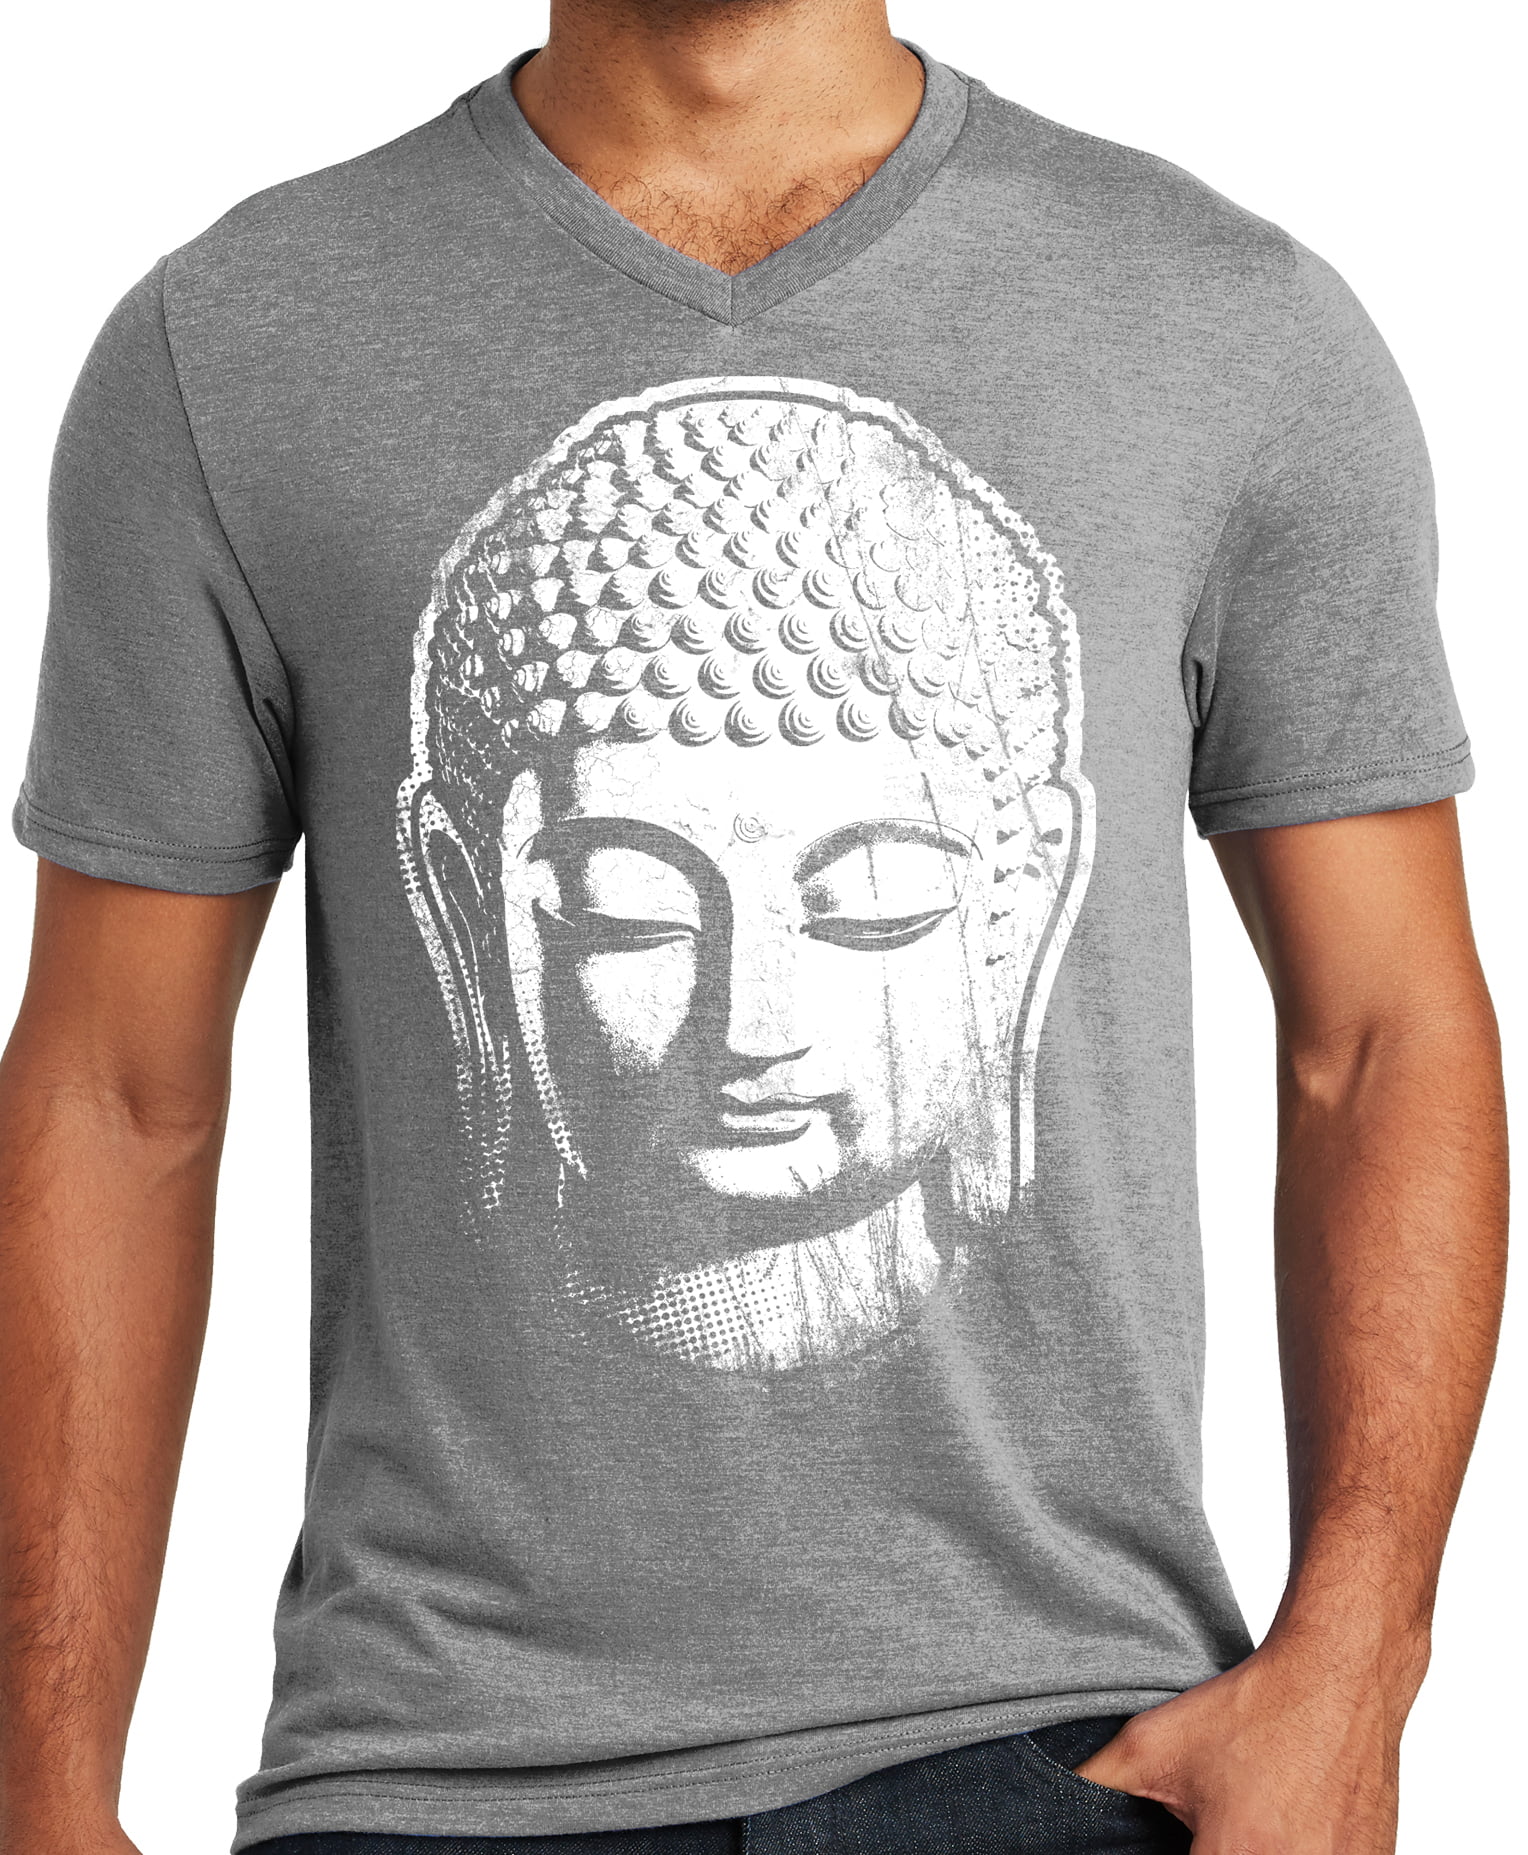 Buddhism Religious Symbol Mens Tee Shirt Pick Size Color Small-6XL 